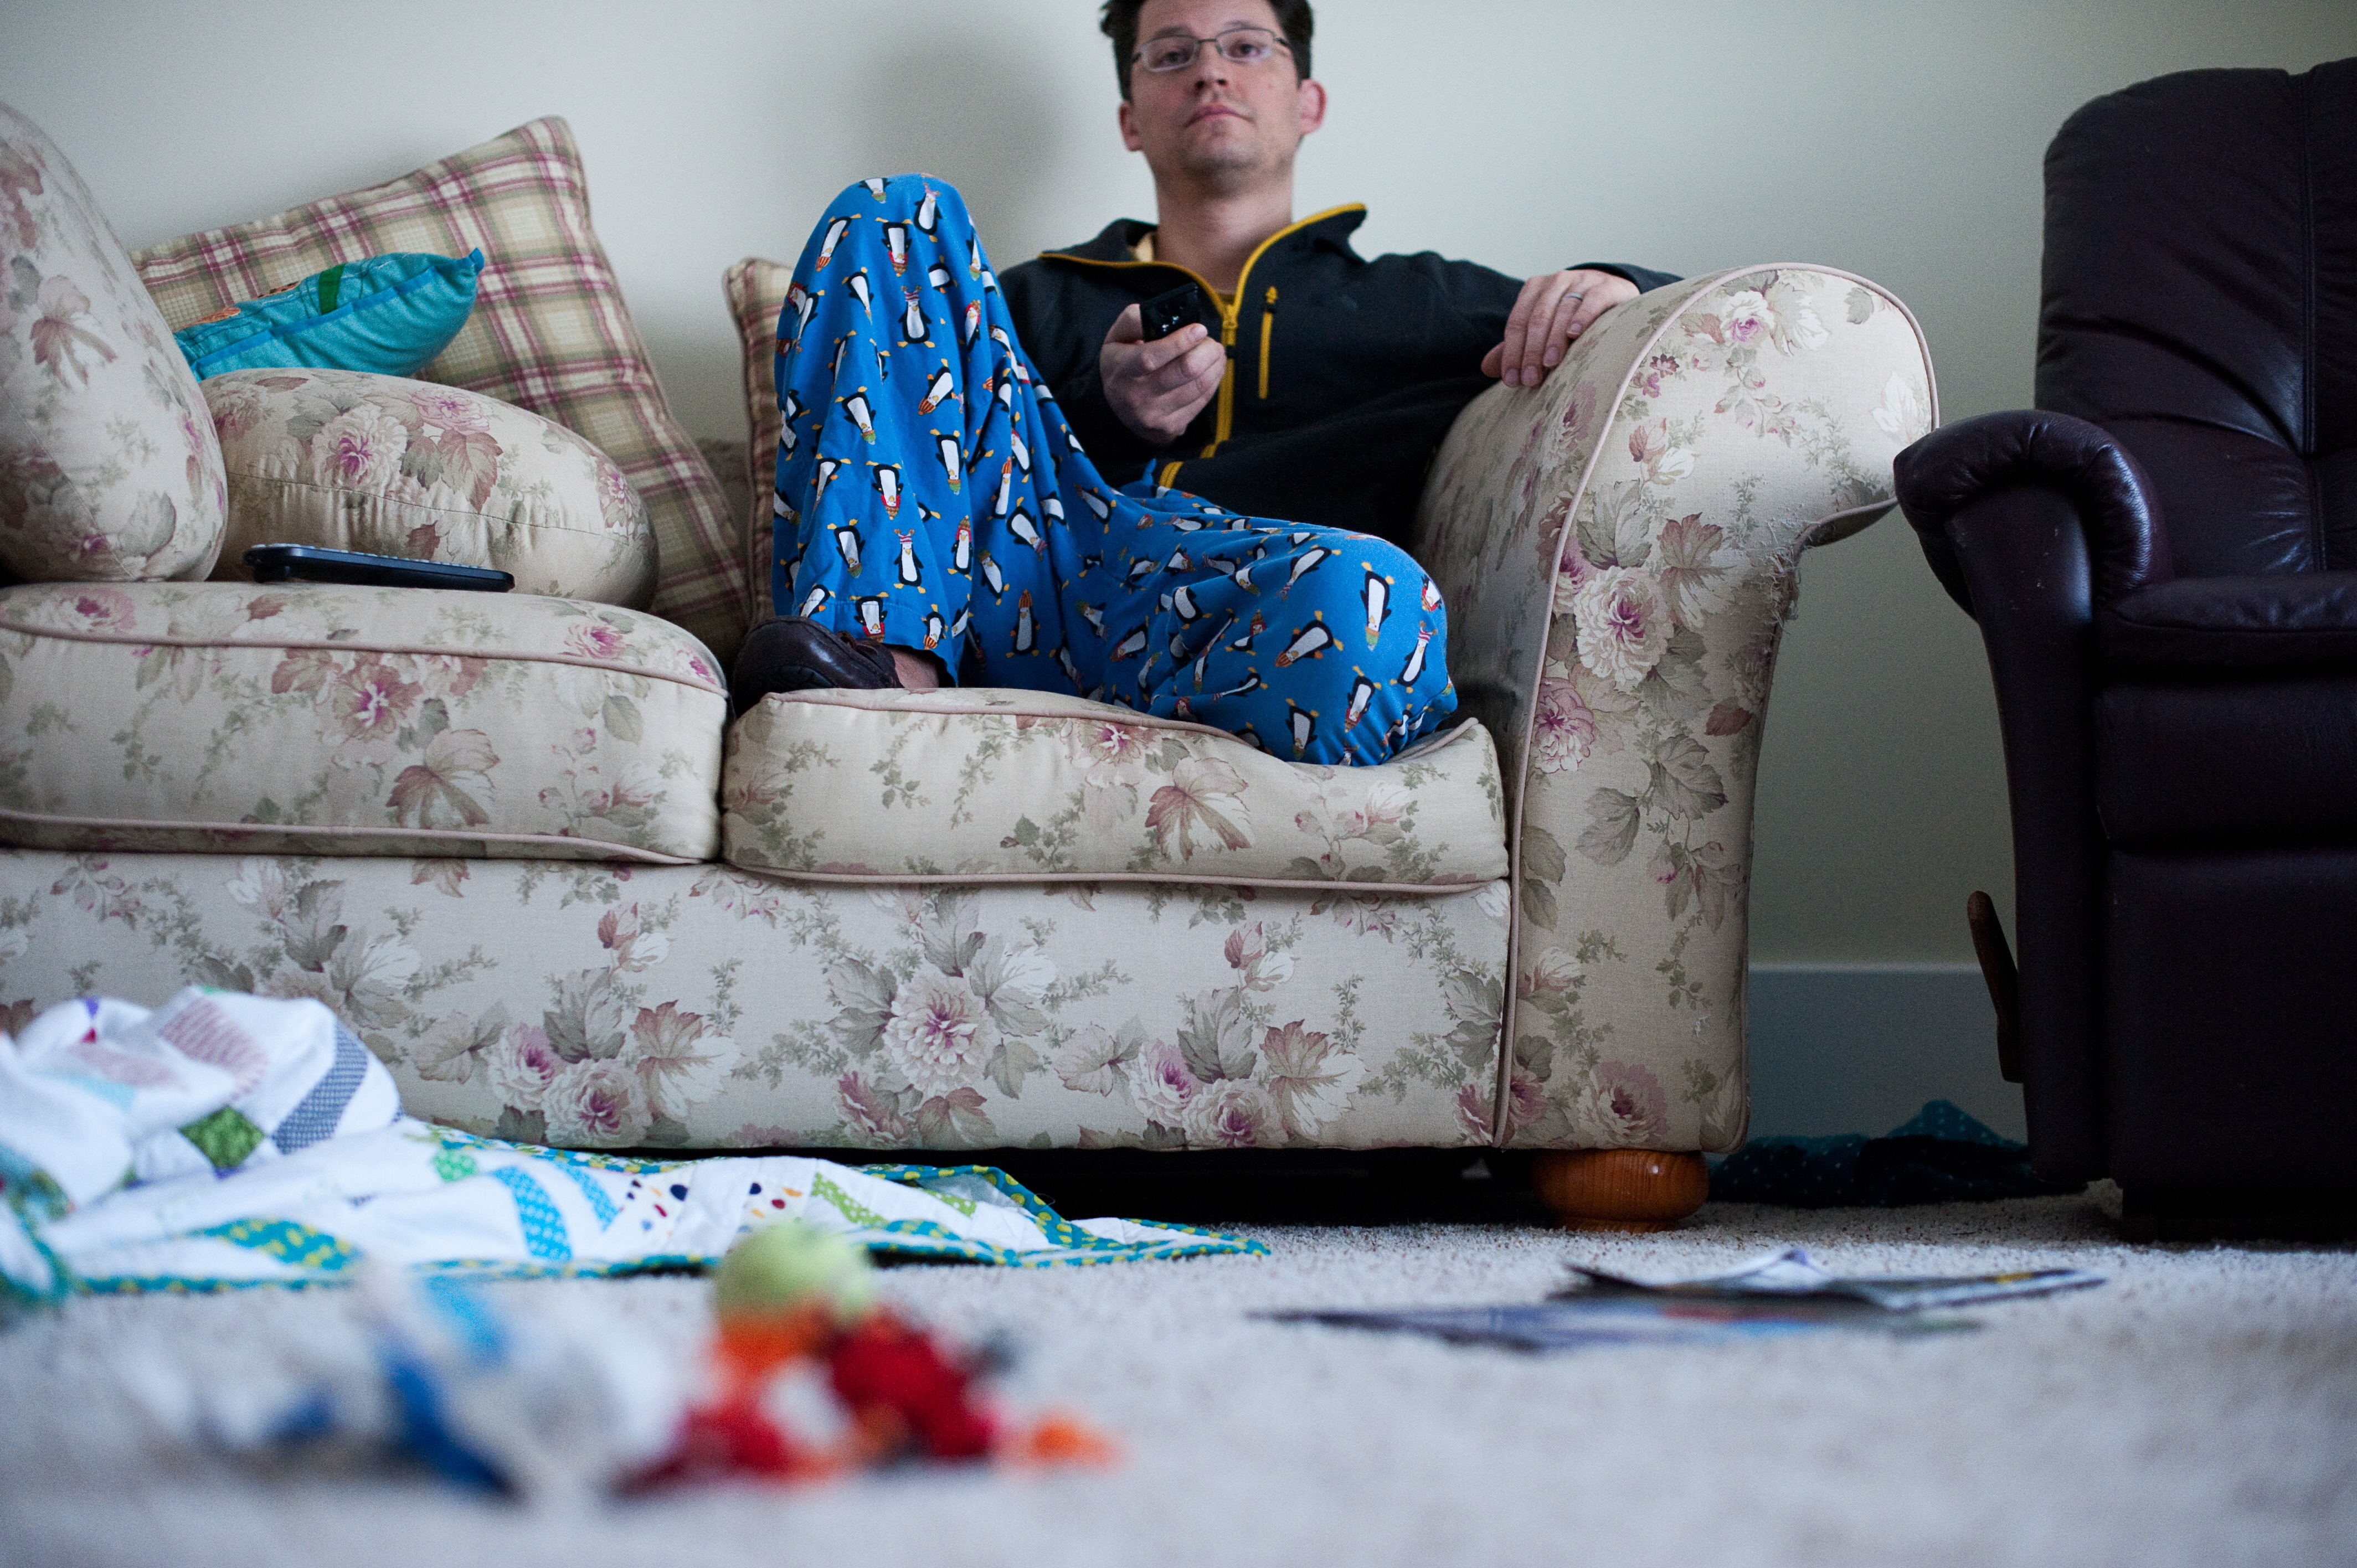 A man in his pajamas lounging around. | Source: Getty Images